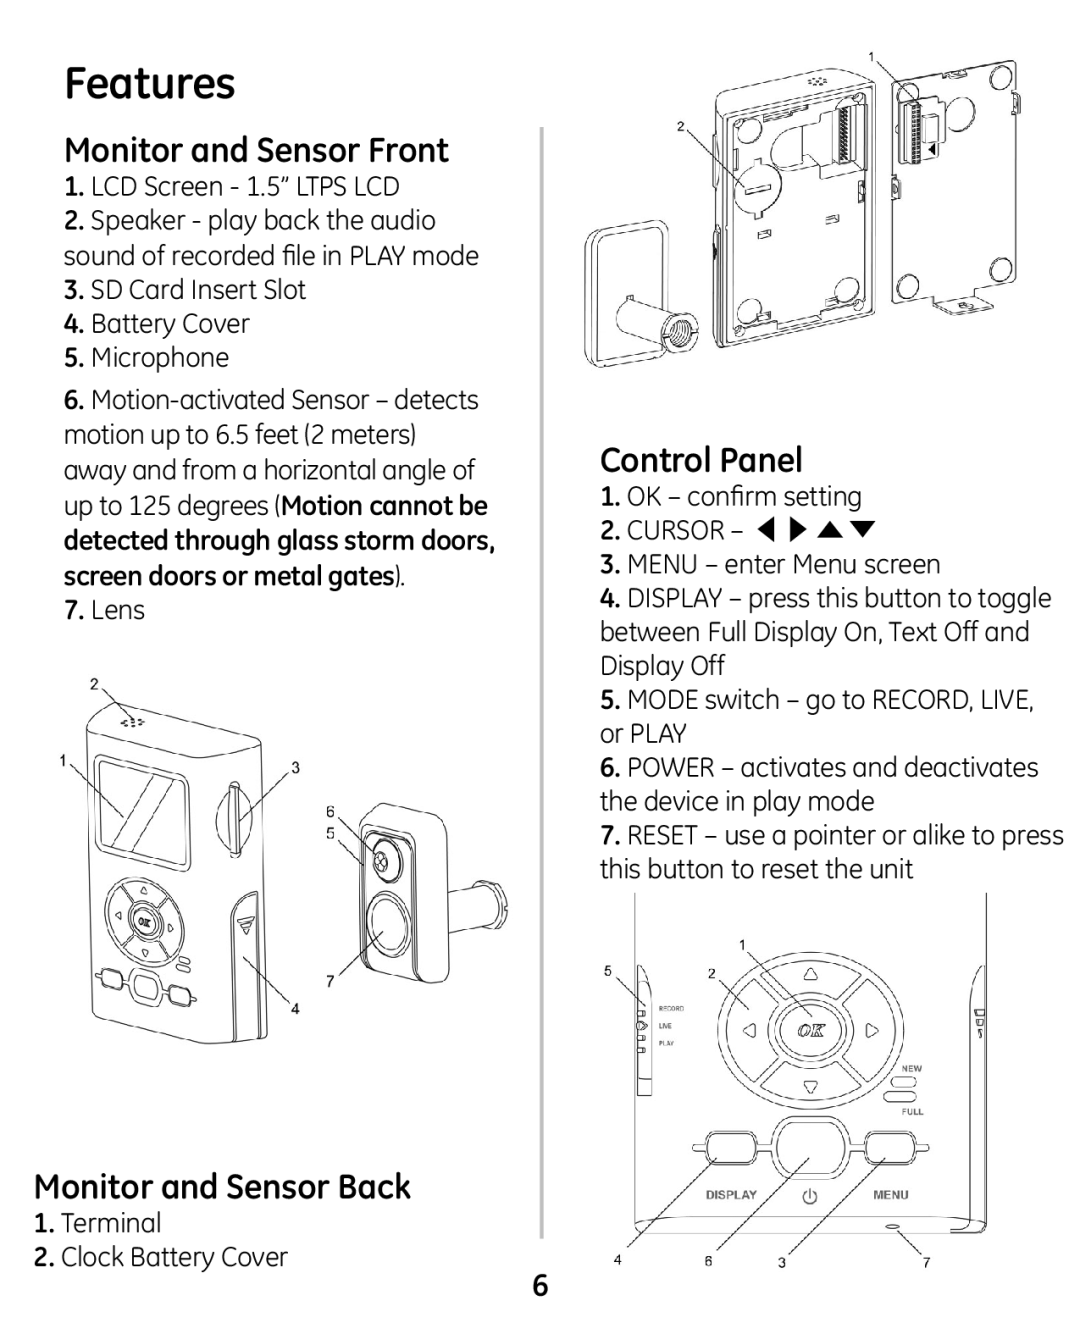 GE 45227-1 manual Features, Monitor and Sensor Front, Monitor and Sensor Back, Control Panel 